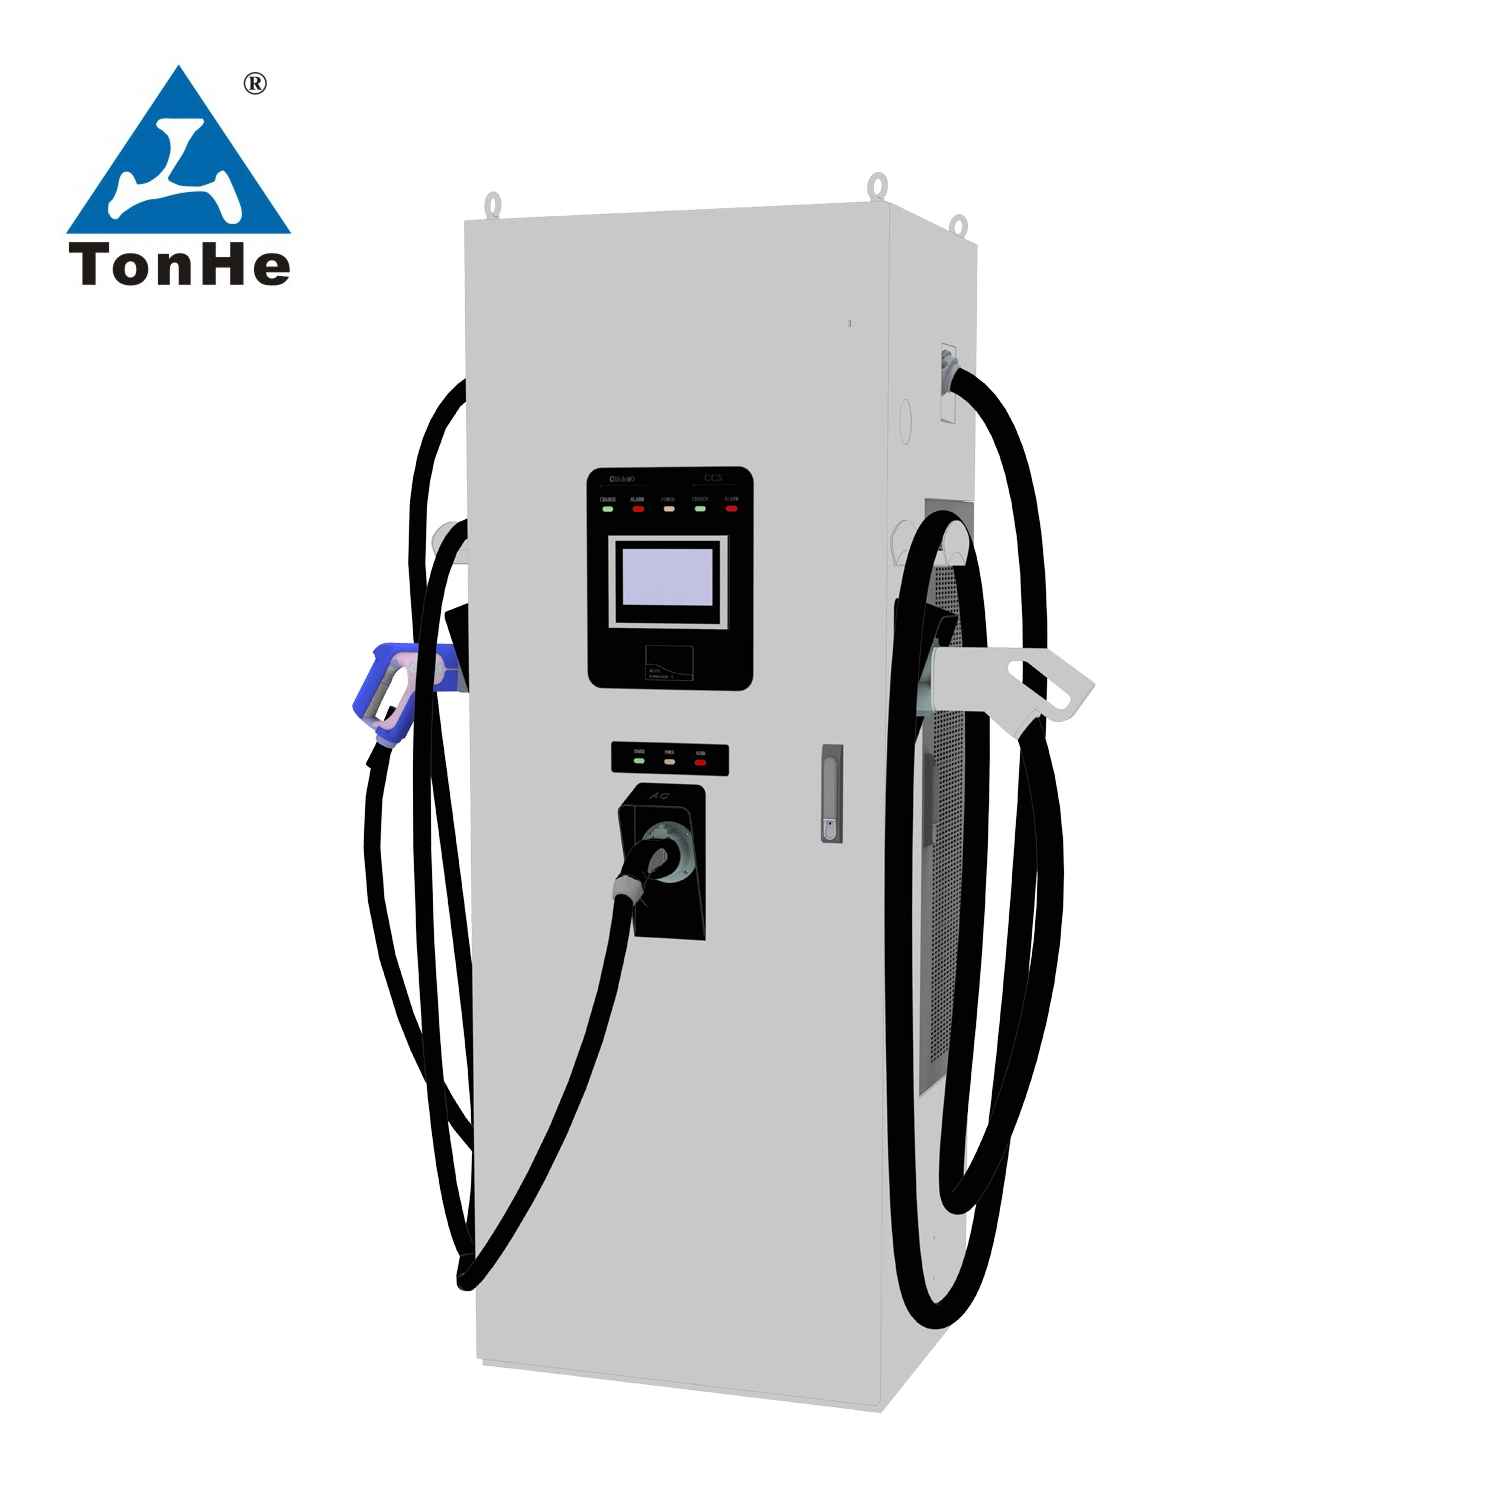 Tonhe Three-Gun EV DC Charger Chademo CCS Type 2 Acdc for EV Super Charging Station